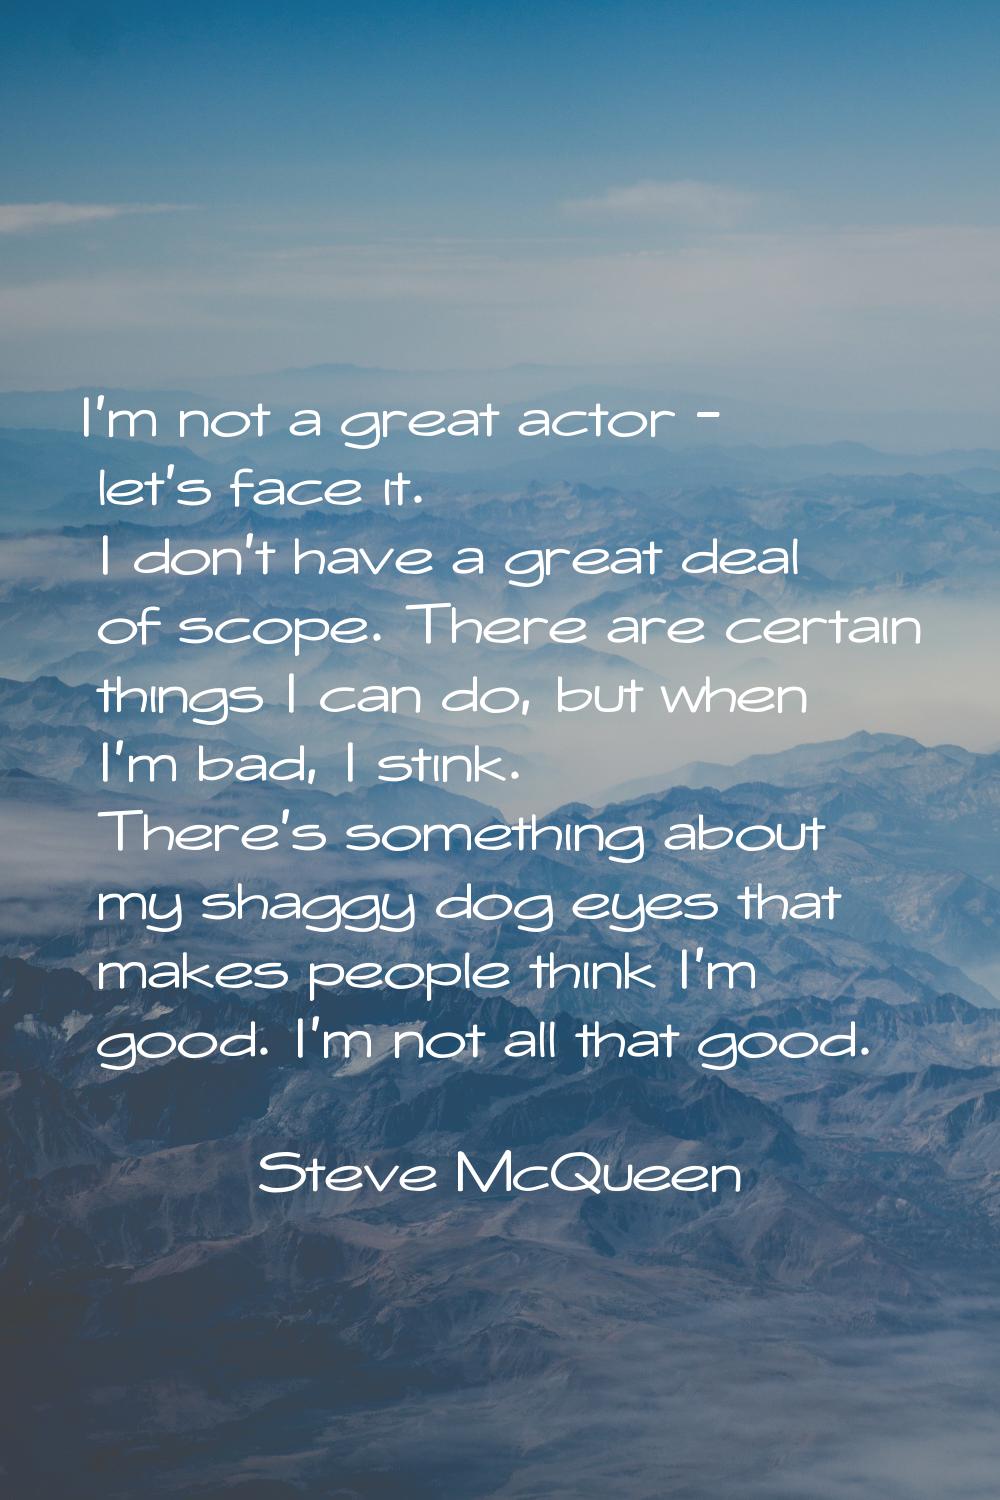 I'm not a great actor - let's face it. I don't have a great deal of scope. There are certain things